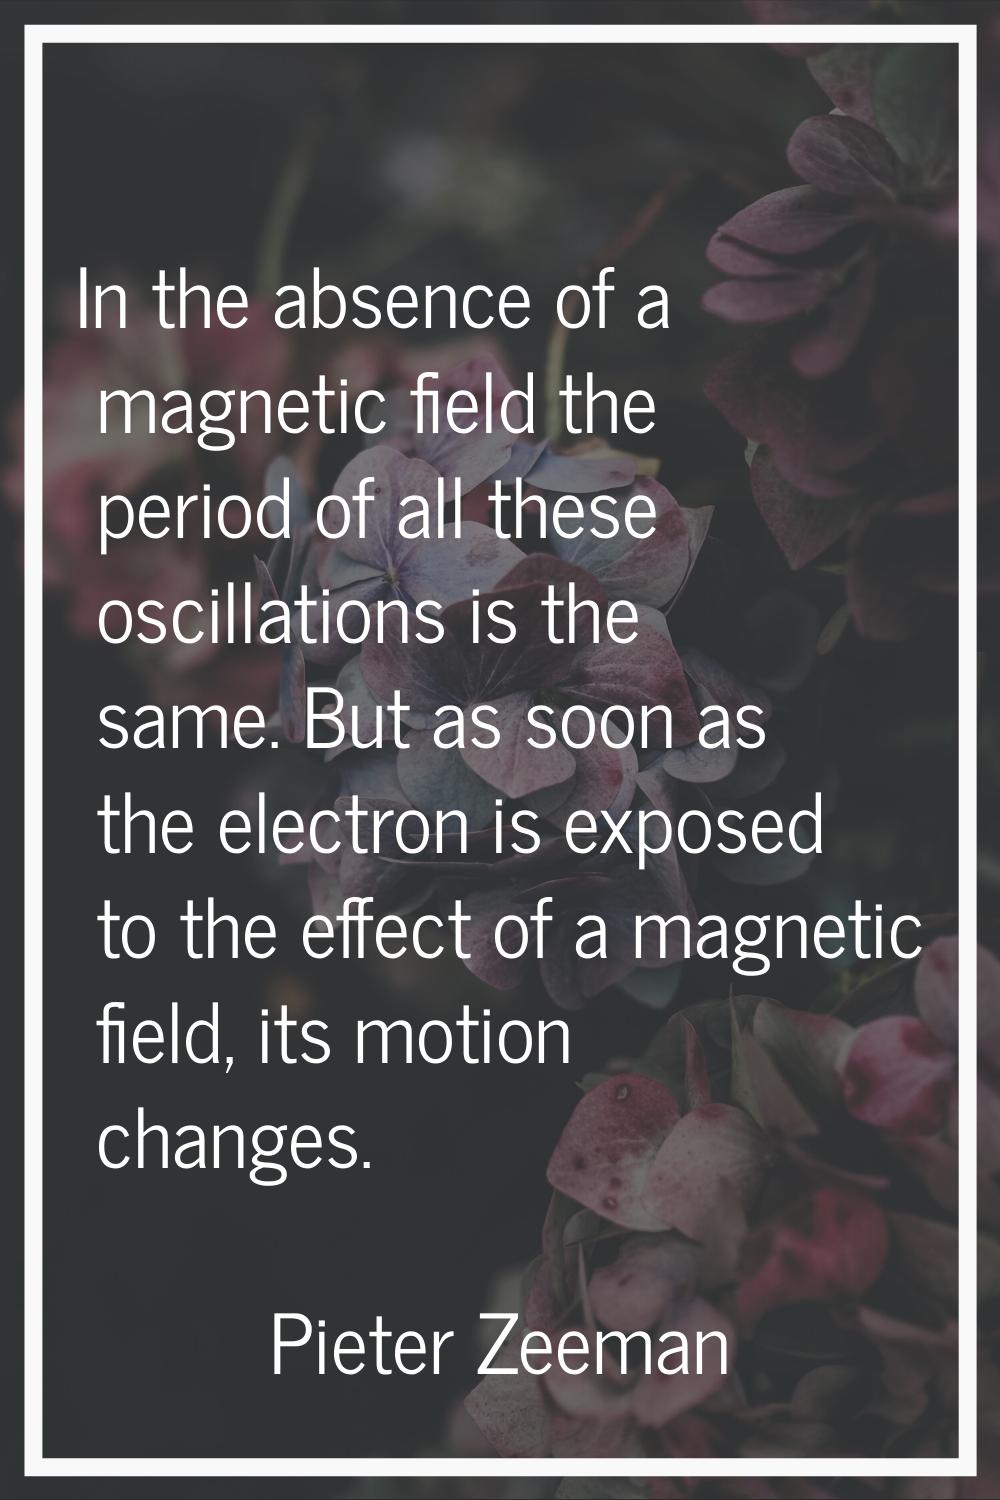 In the absence of a magnetic field the period of all these oscillations is the same. But as soon as